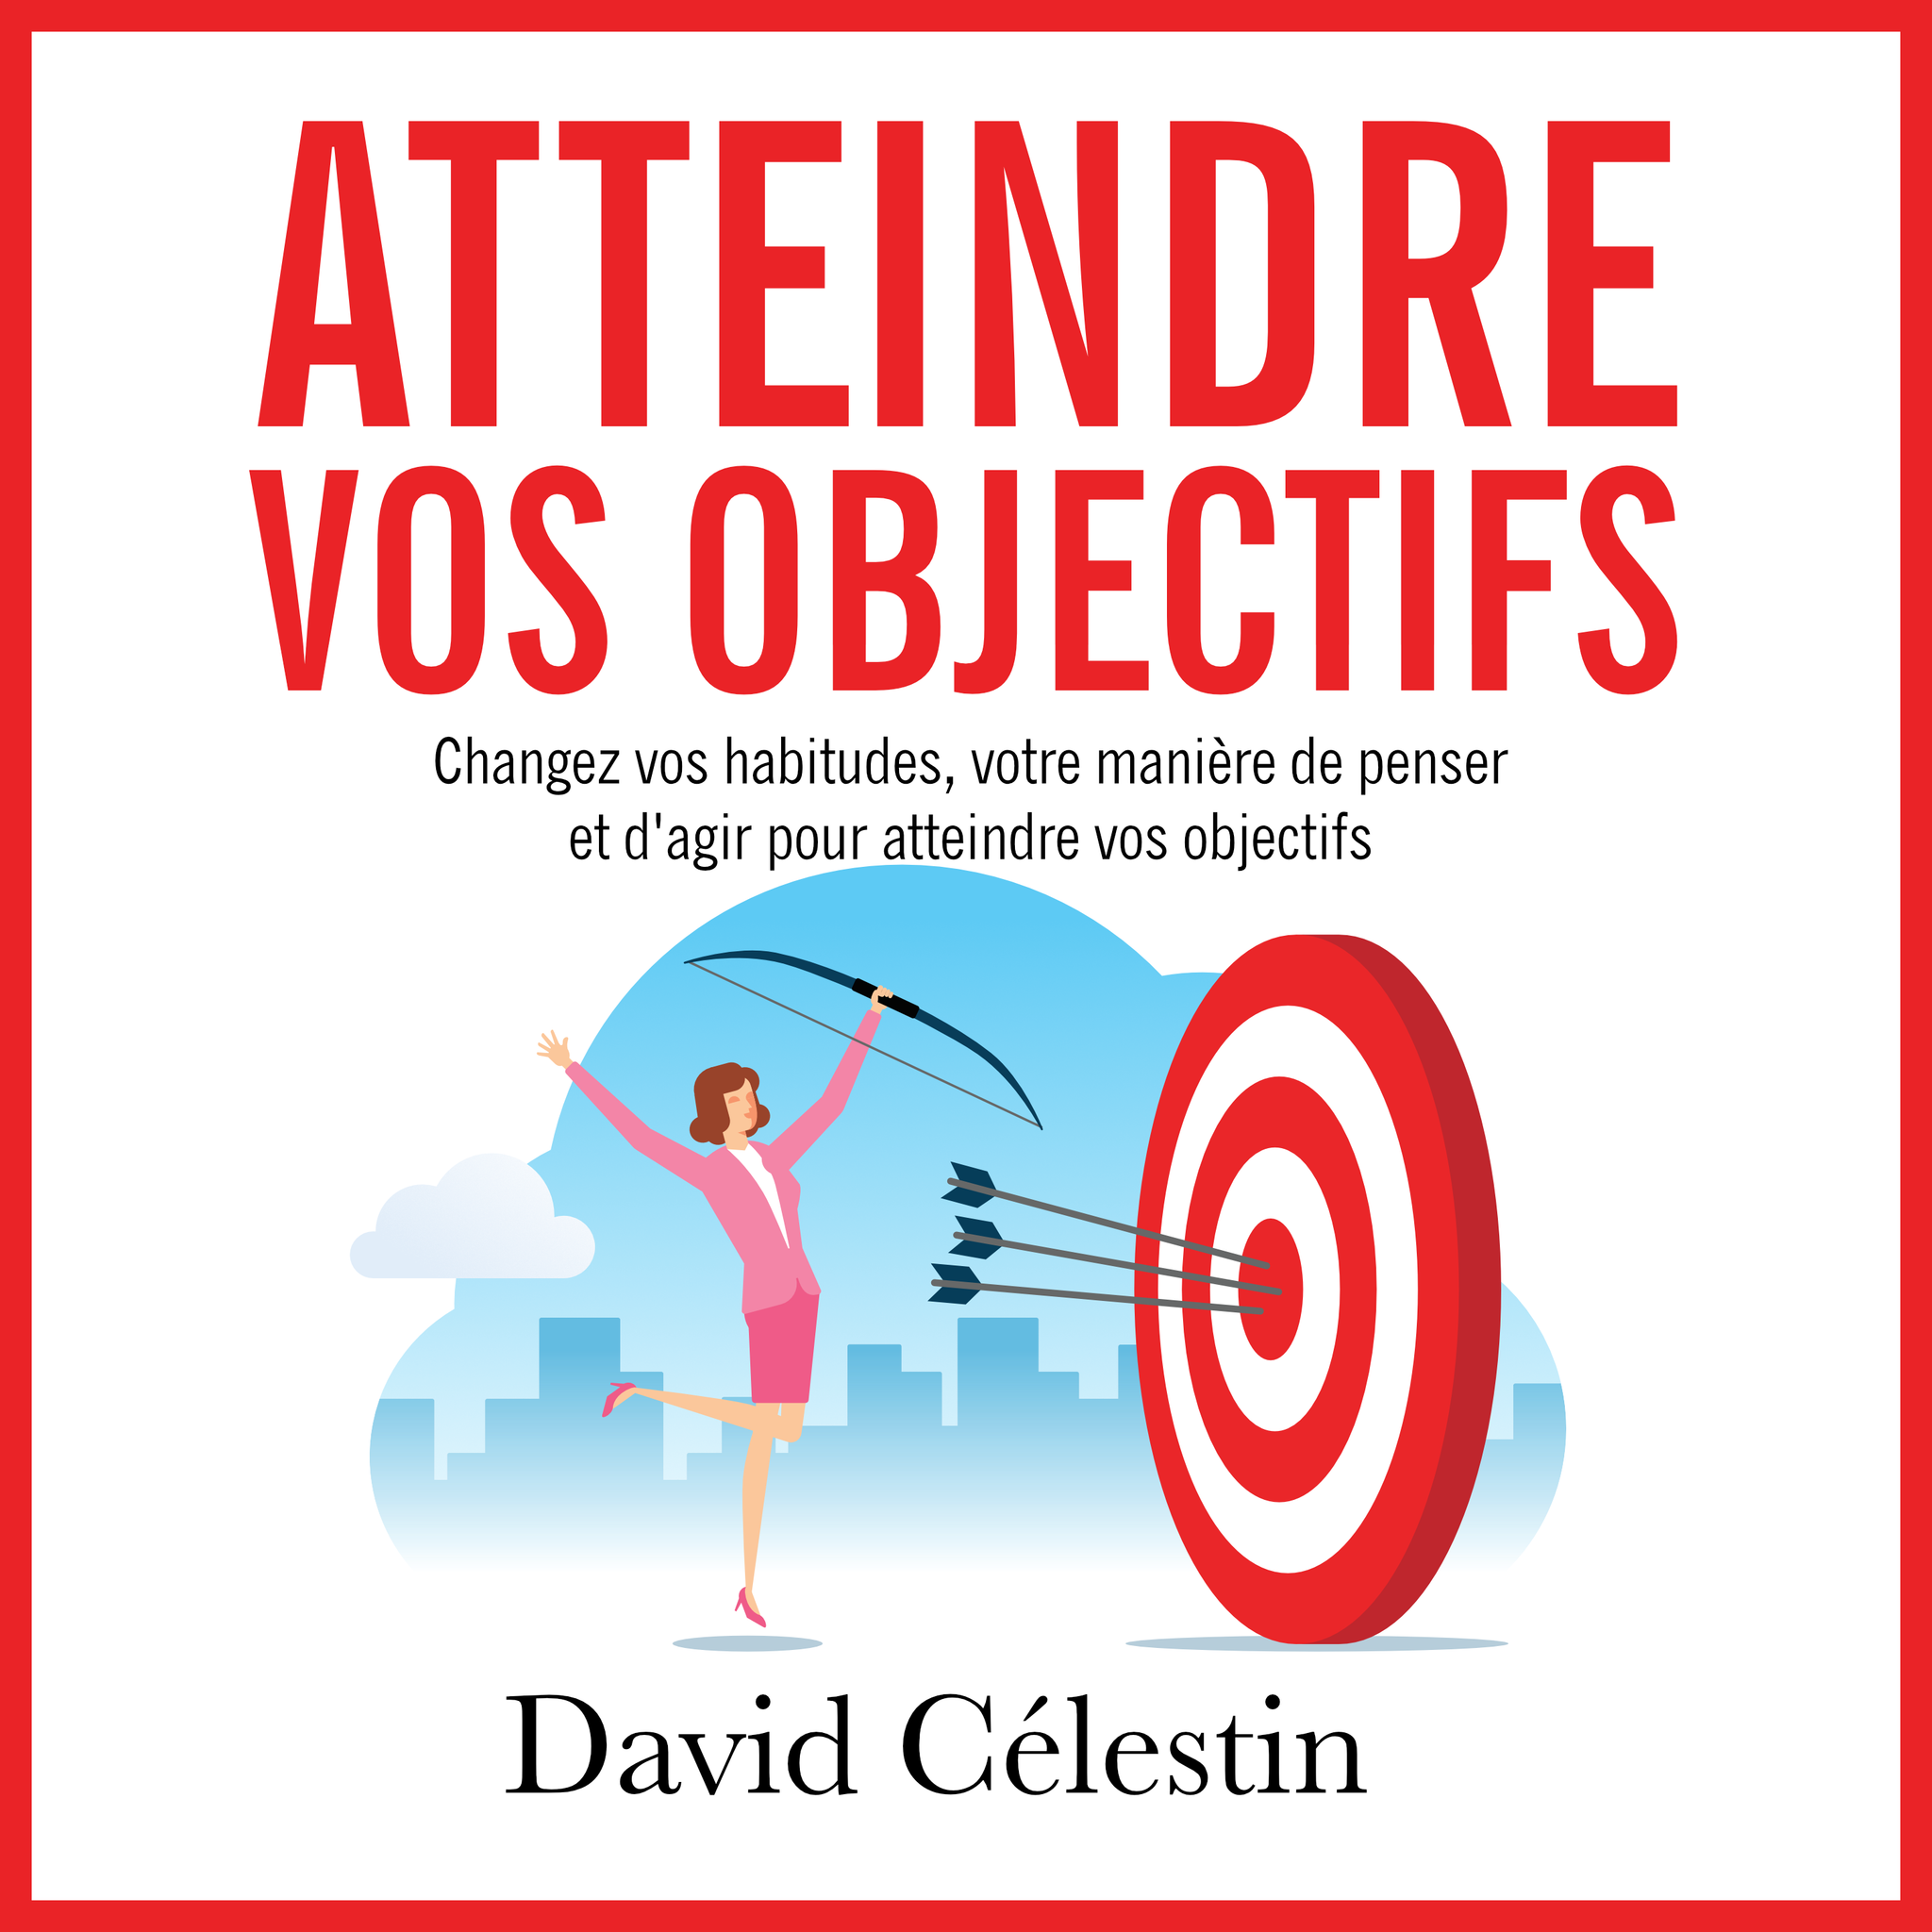 Atteindre vos objectifs - ebook+ audiobook